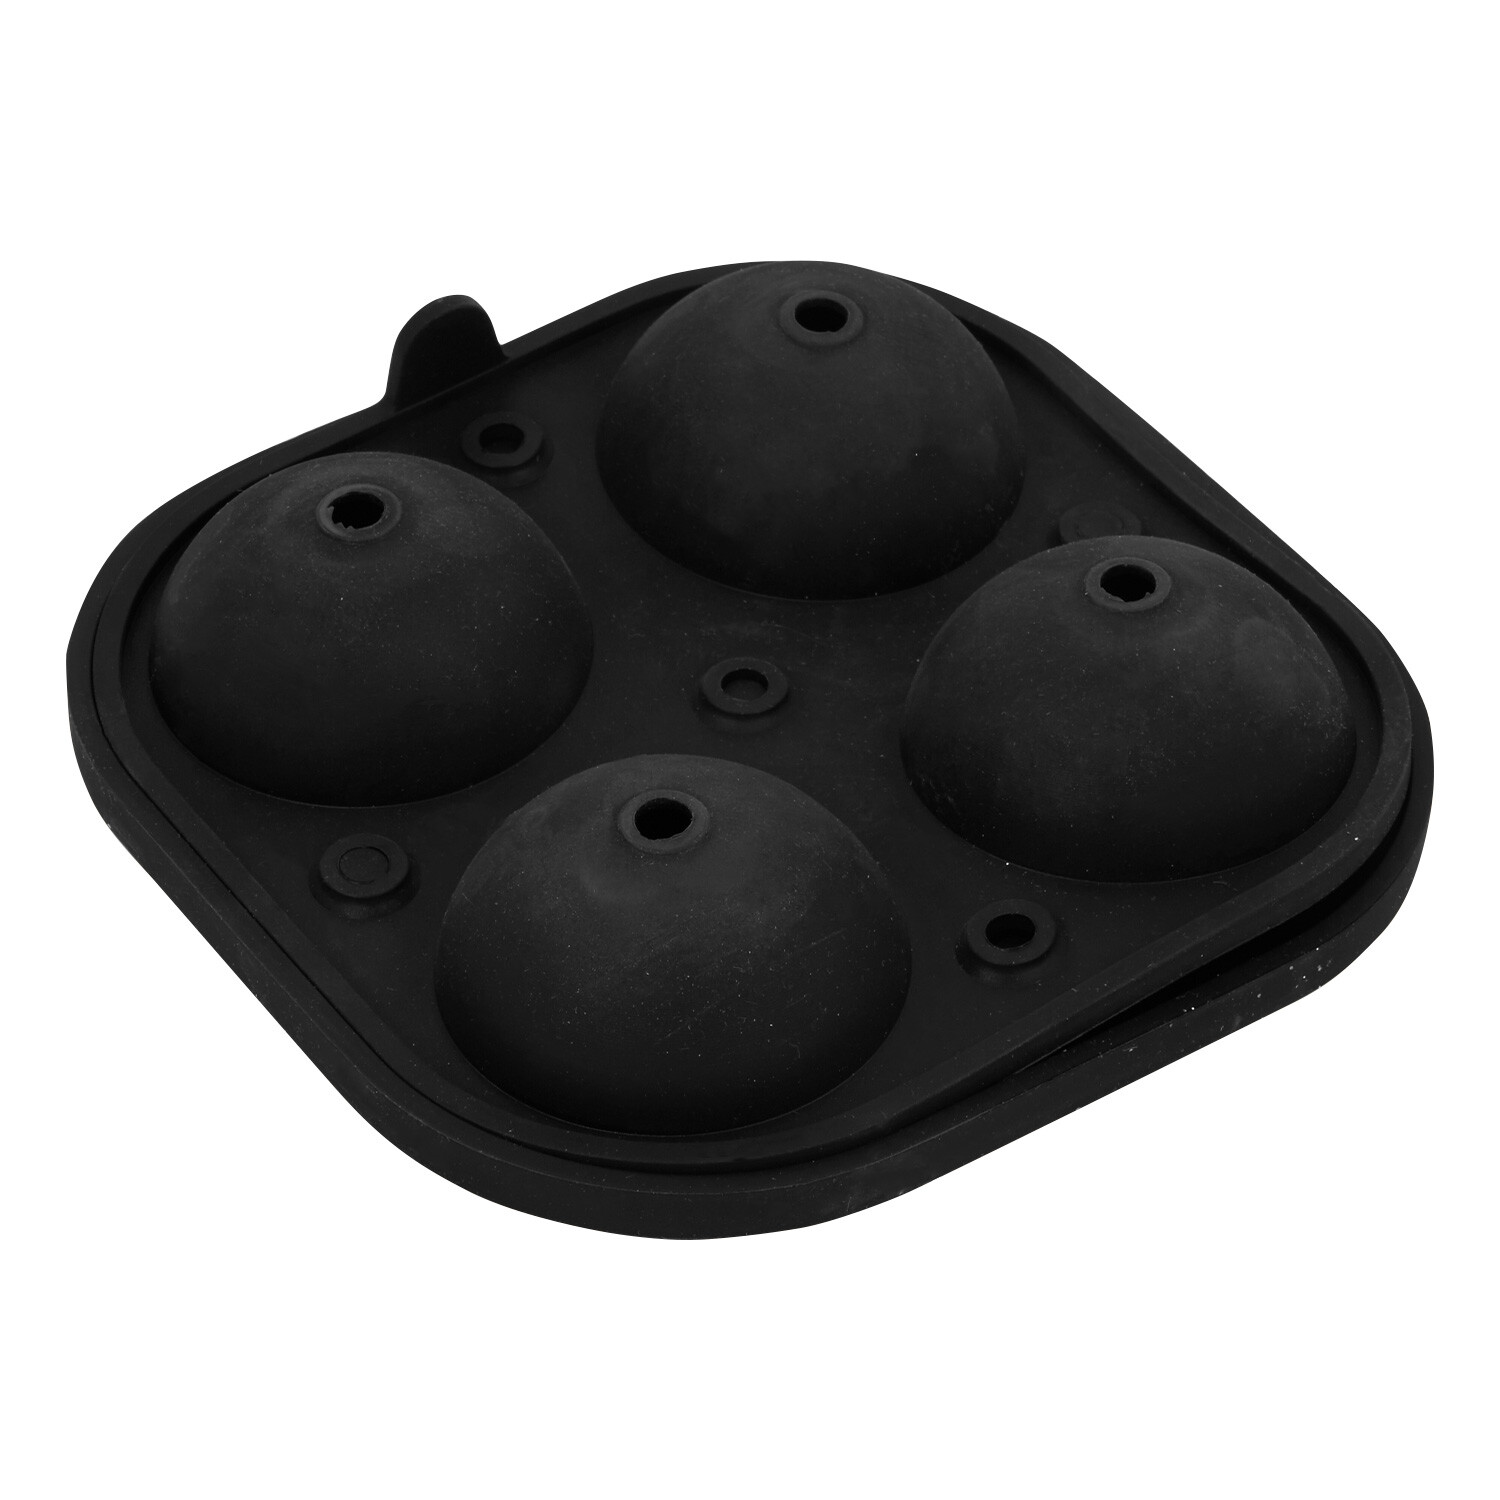 4-Ball Silicone Ice Mould - Black Image 3